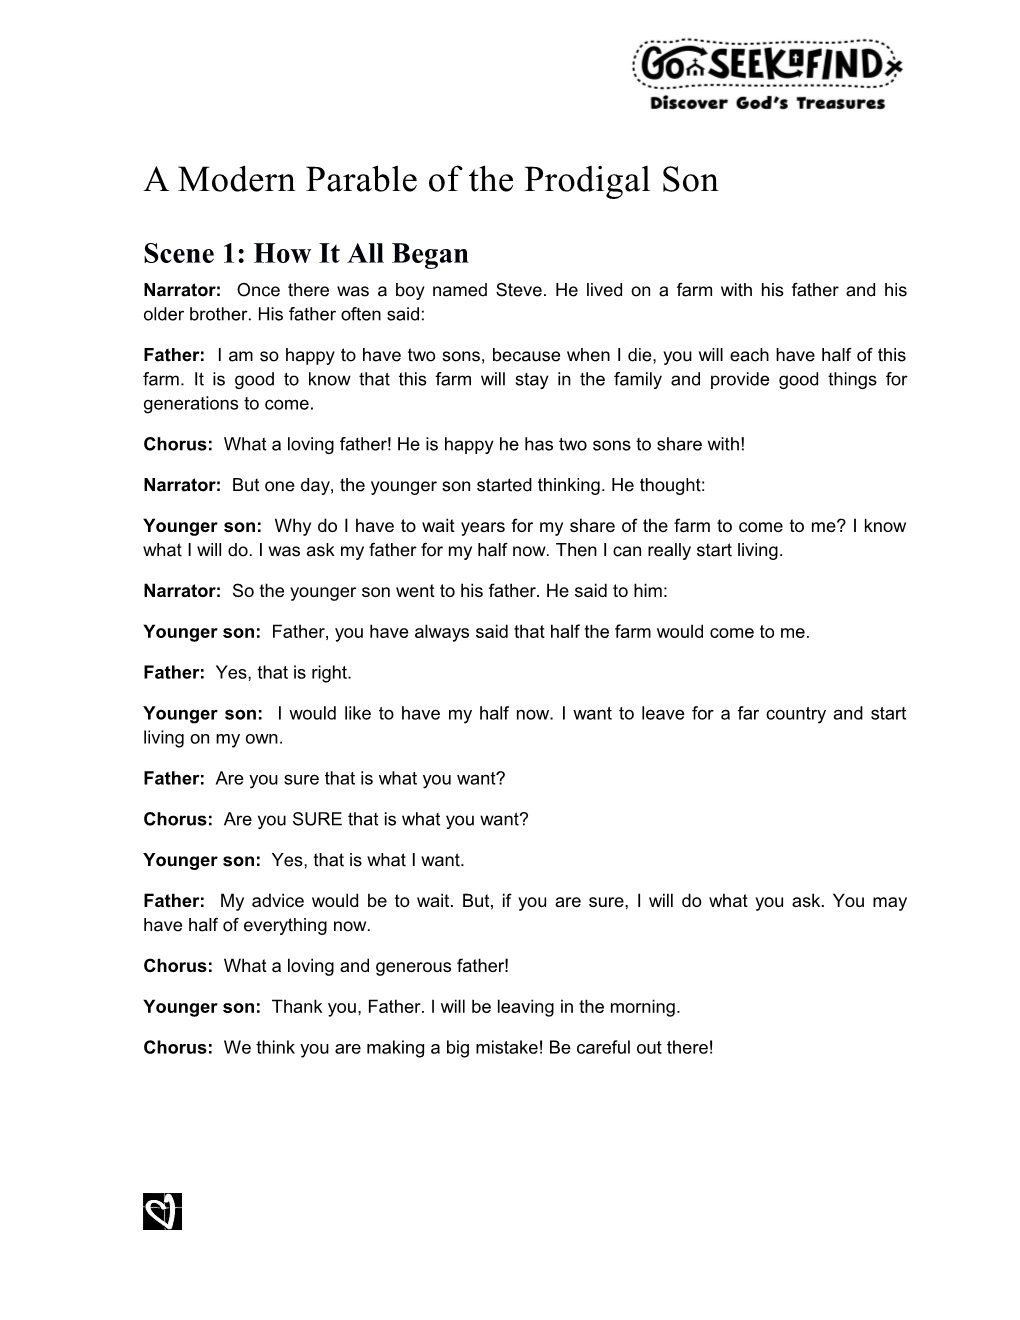 A Modern Parable of the Prodigal Son